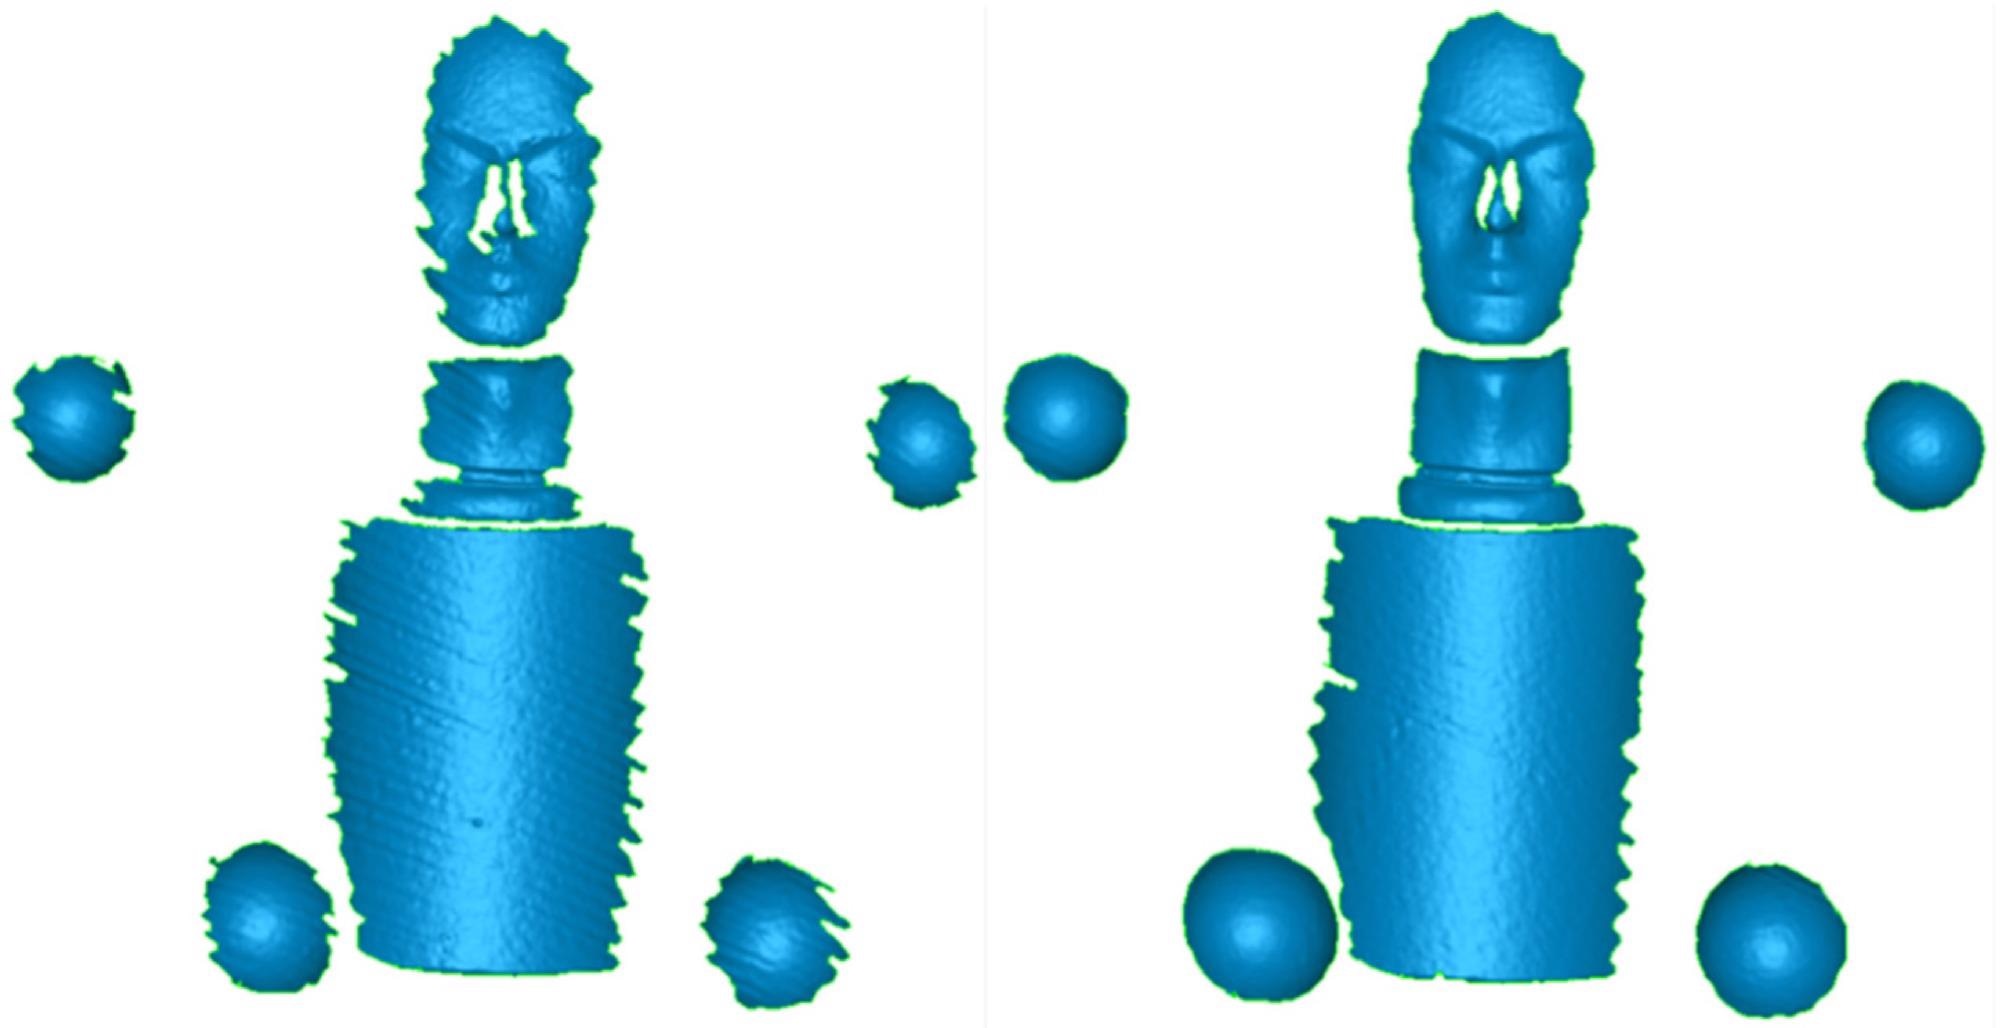 3D measurement results of the reconstruction of the air measurement with sensor velocity of 0.2 m/s without motion compensation (left) and with motion compensation (right). Note the higher completeness at the margins of the objects with motion compensation.